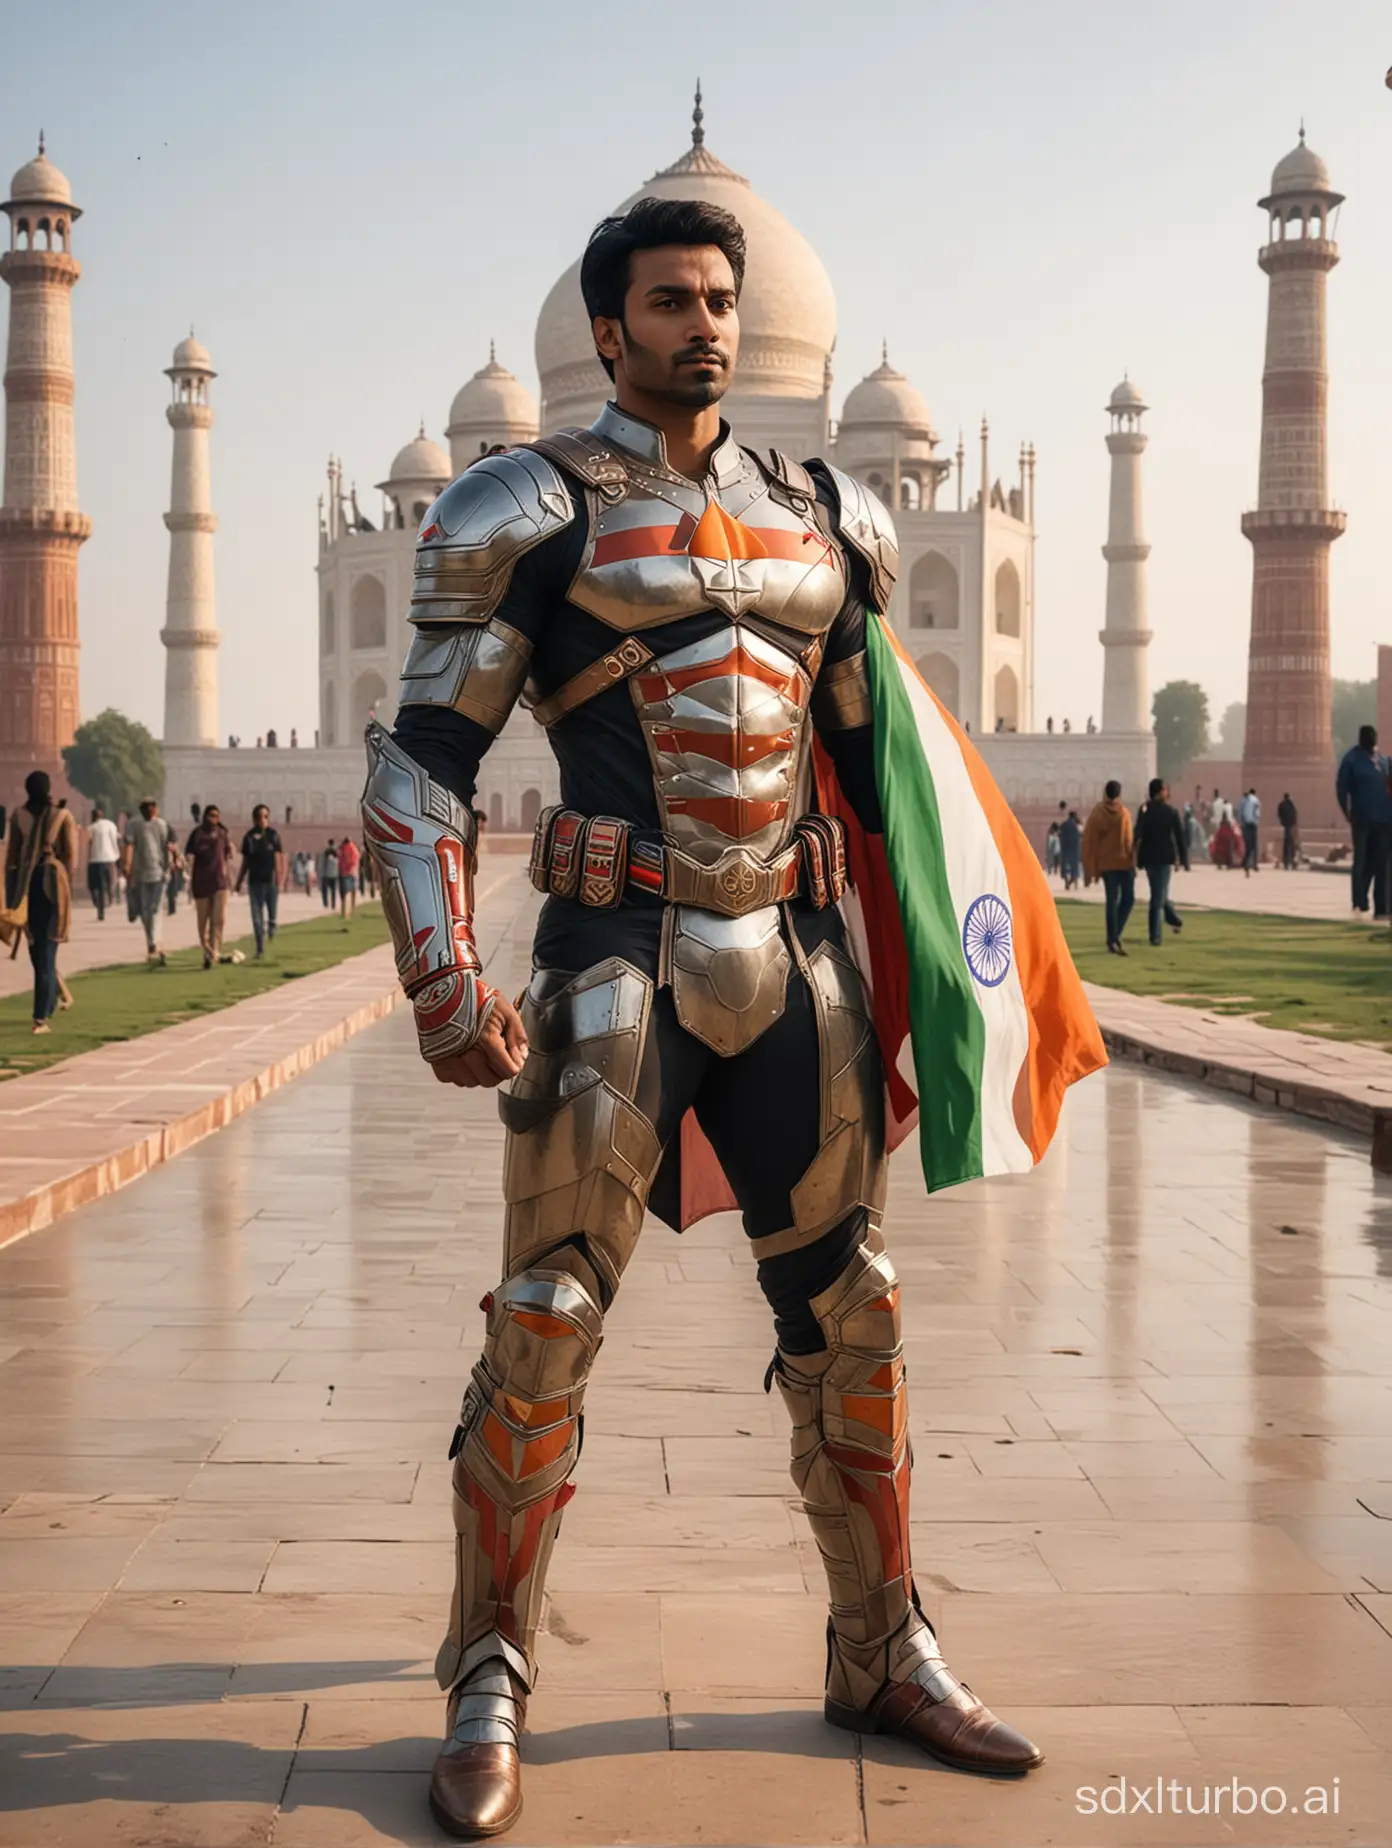 Create a superhero with Indian origin wearing armored costume with Indian flag colors and he’s standing near Taj Mahal